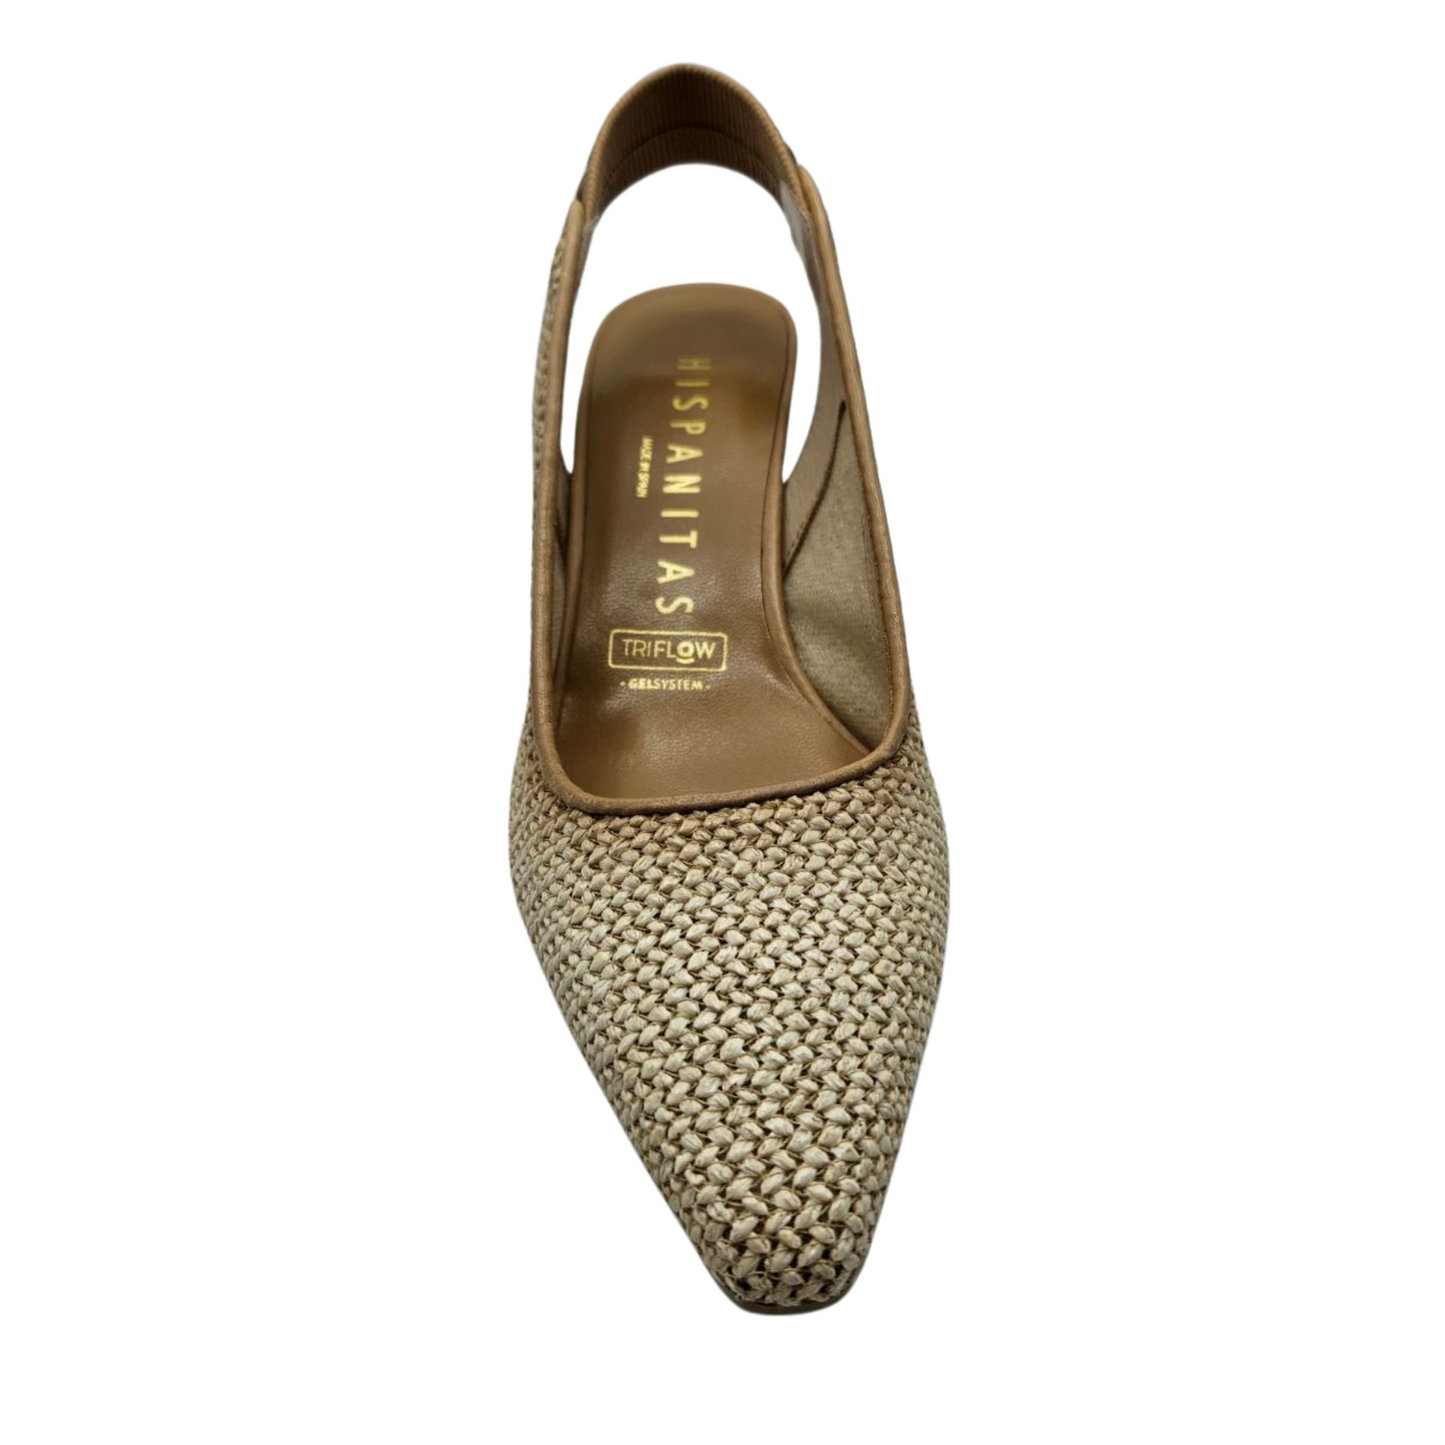 Front facing view of cream coloured woven pump with flared heel and elastic slingback strap